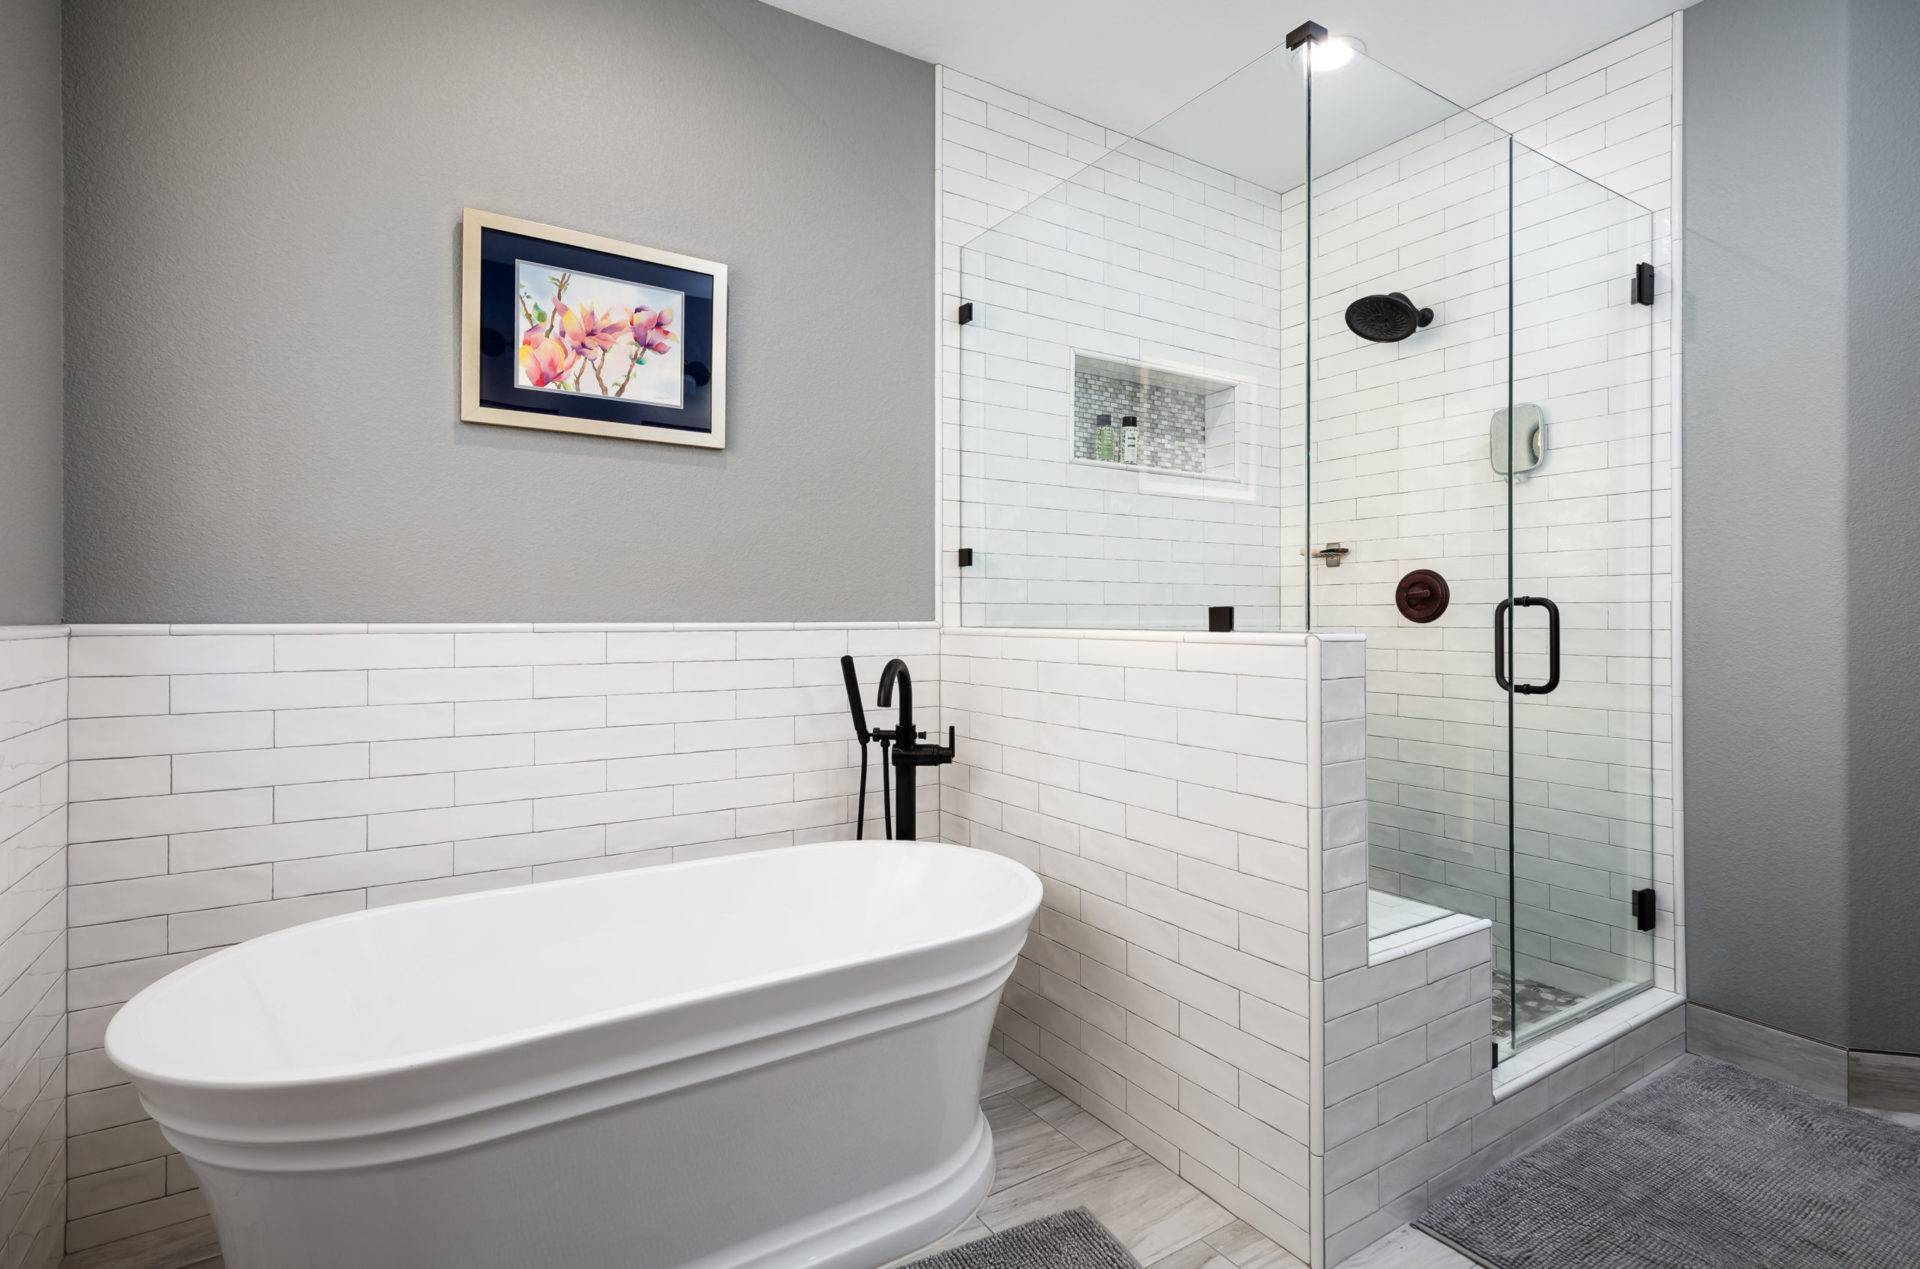 Step four as you design a home involves making selections like bathtubs, tile, and shower fixtuers